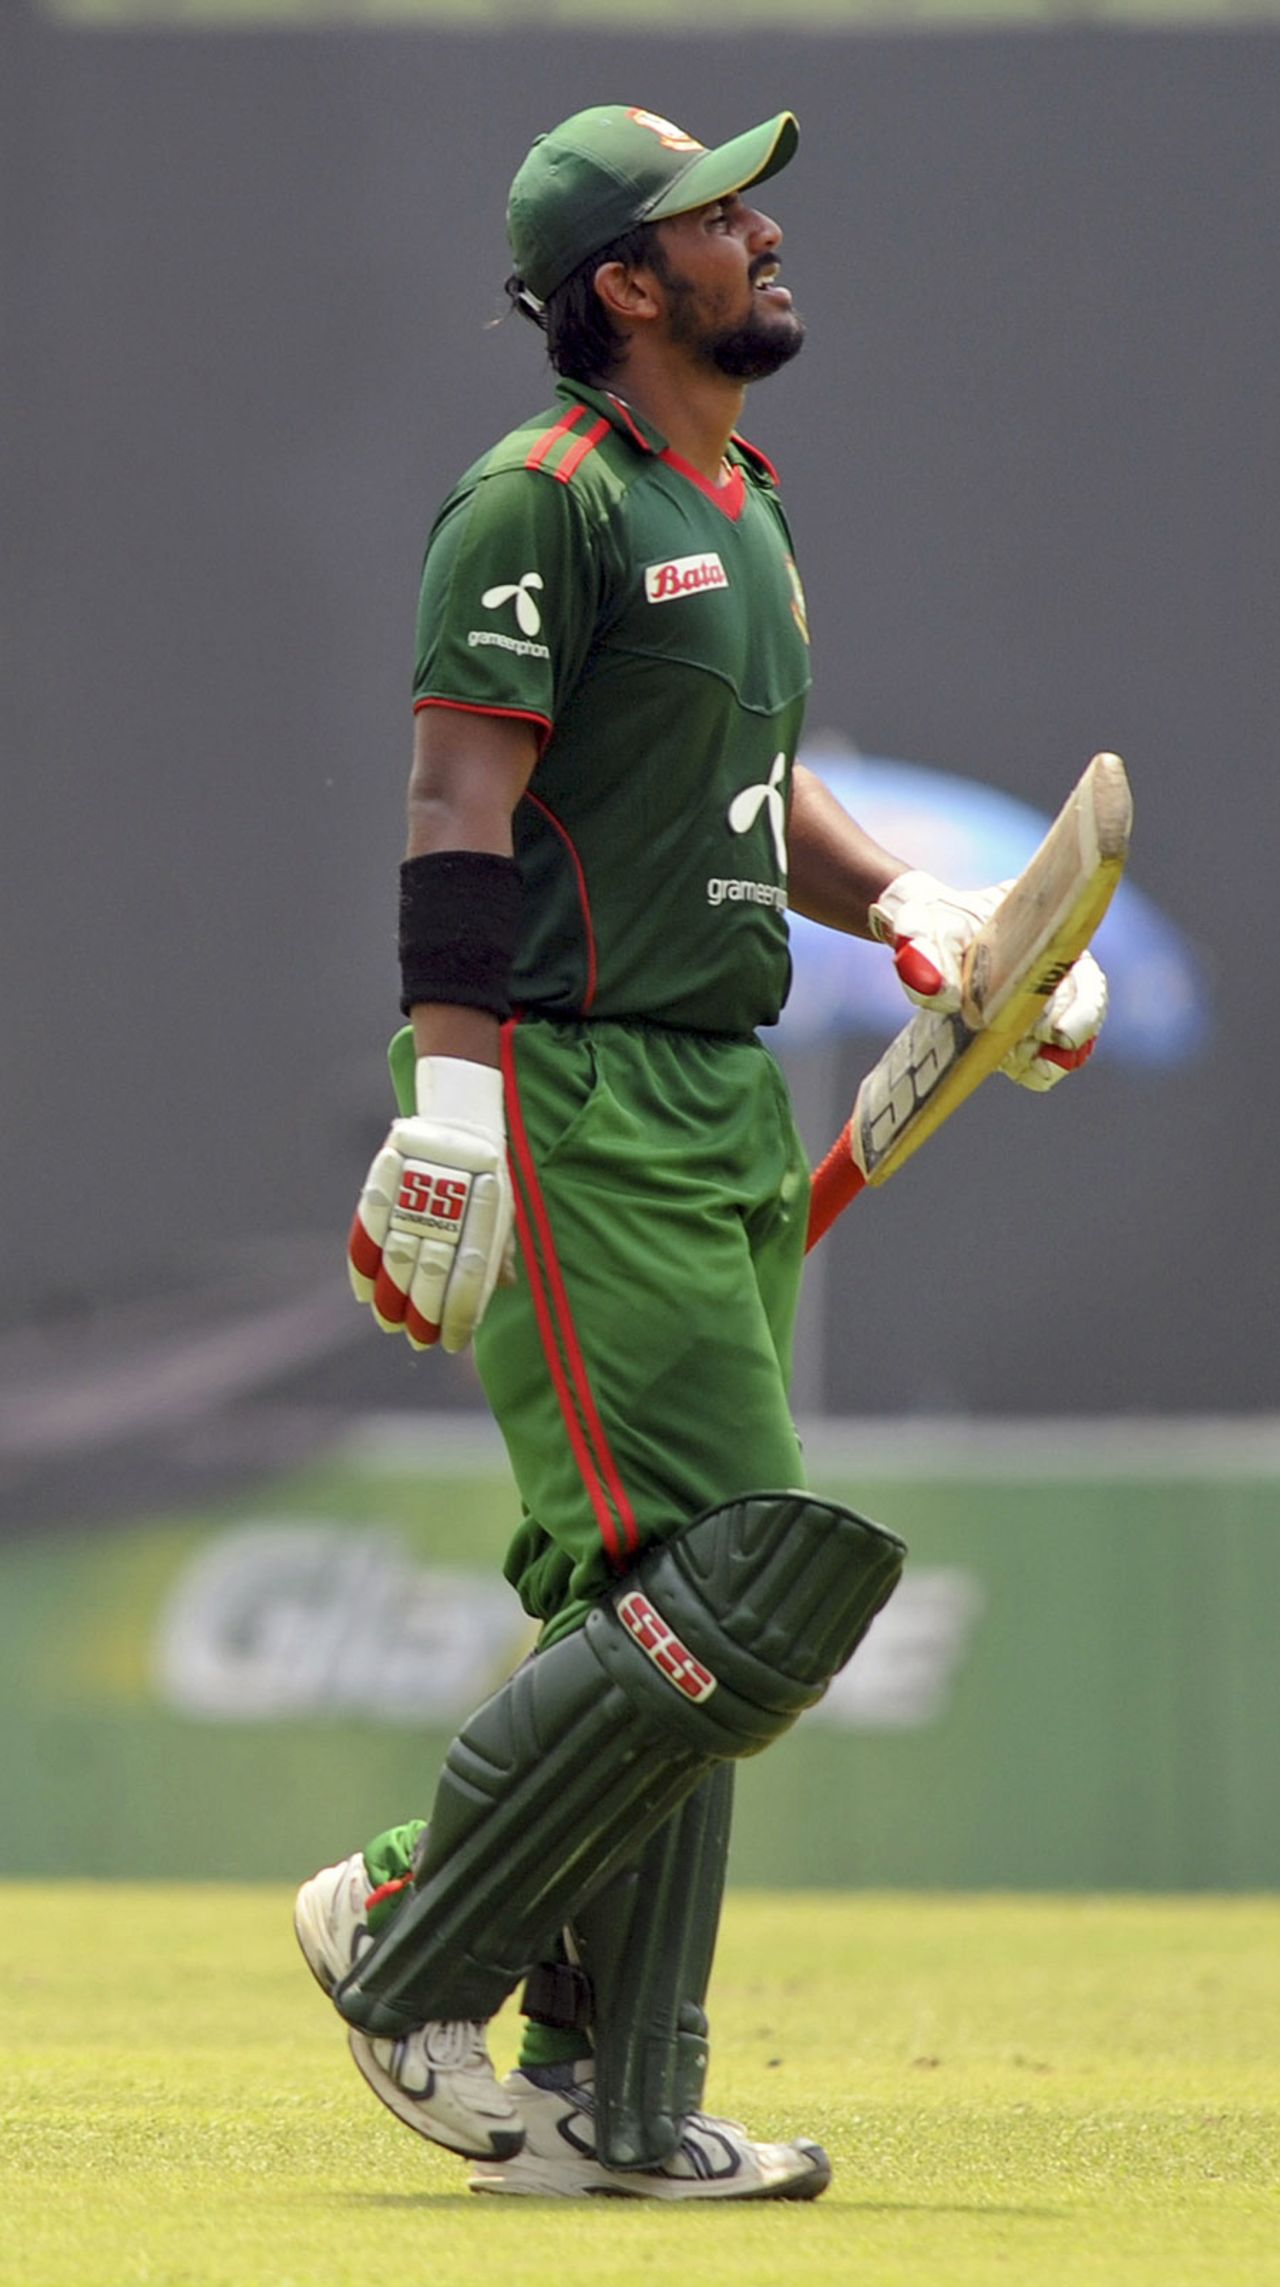 Shahriar Nafees is disappointed after being dismissed for 56, Bangladesh v Australia, 2nd ODI, Mirpur, April 11, 2011